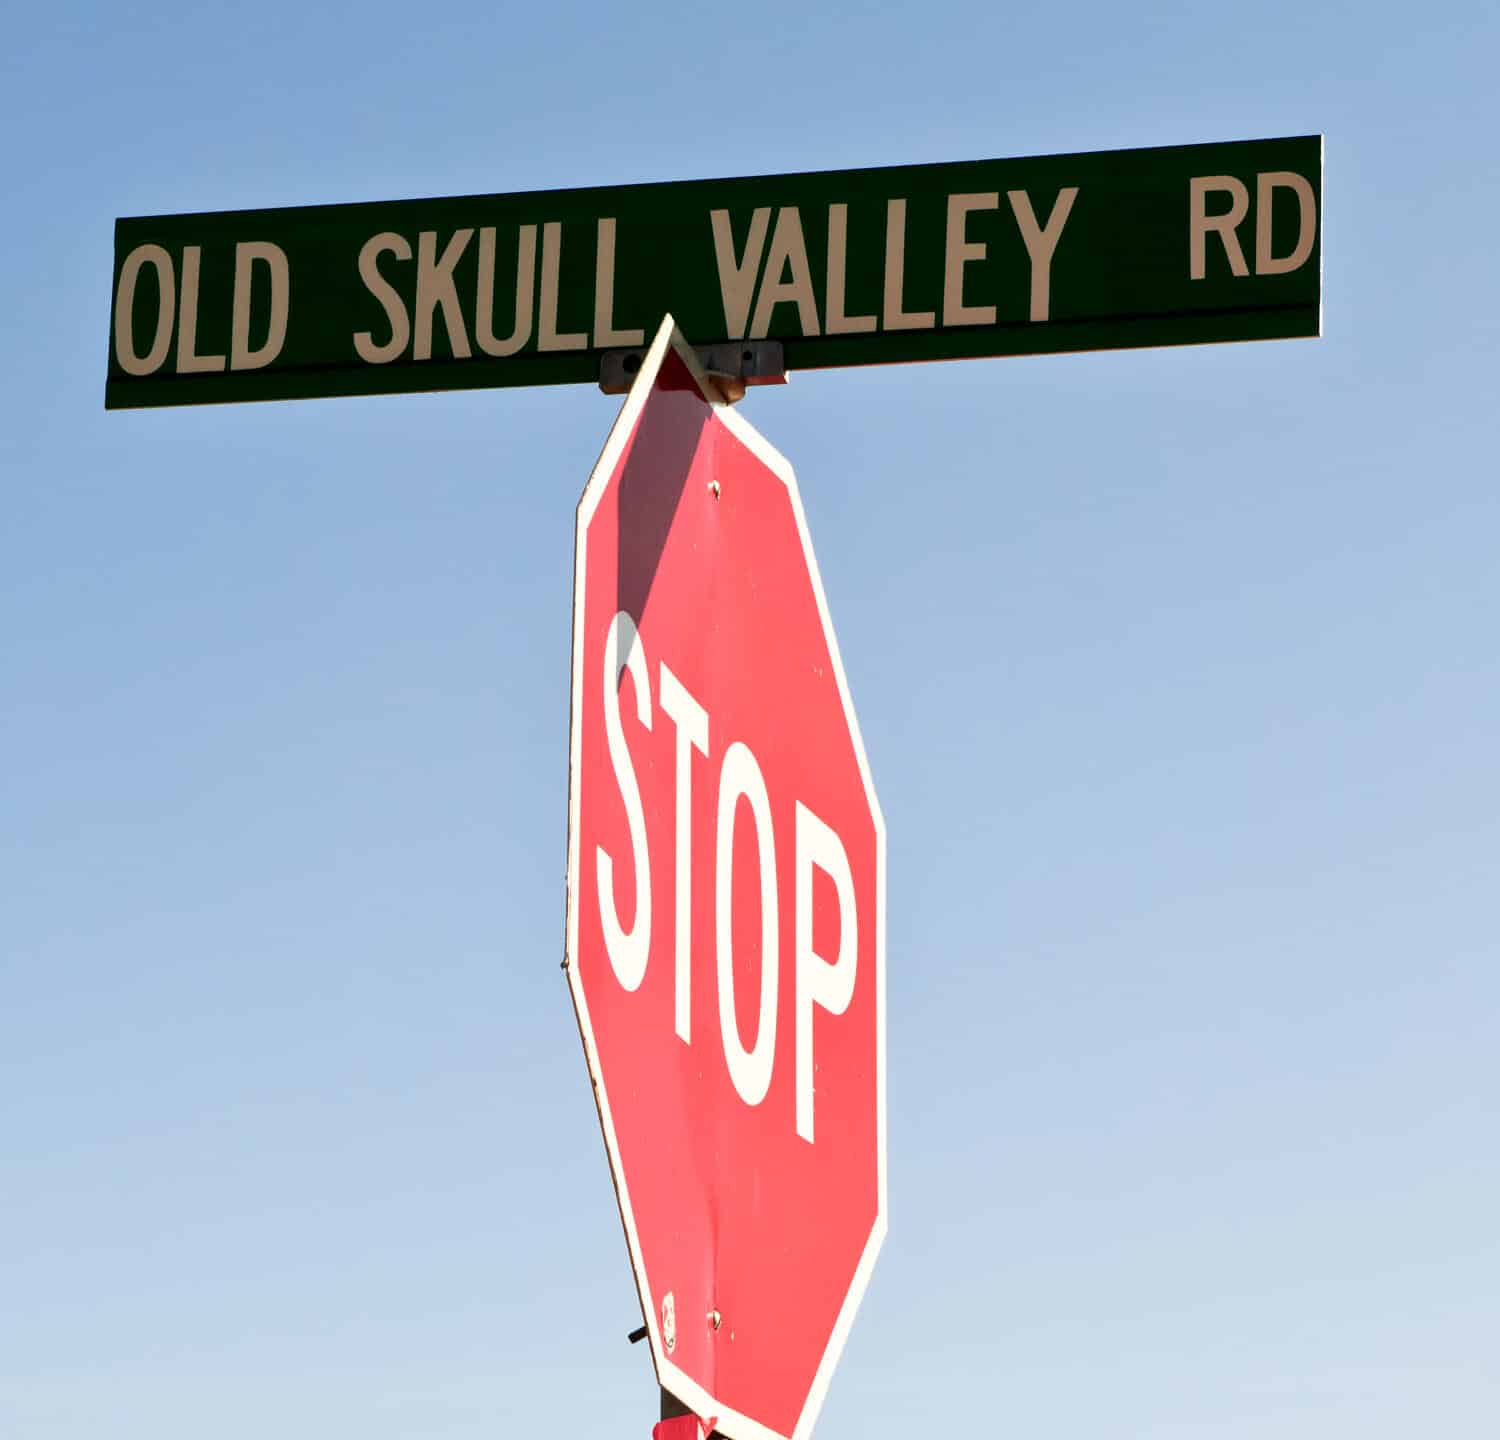 An old road sign in the town of Skull Valley Arizona indicating where old bones dwell.